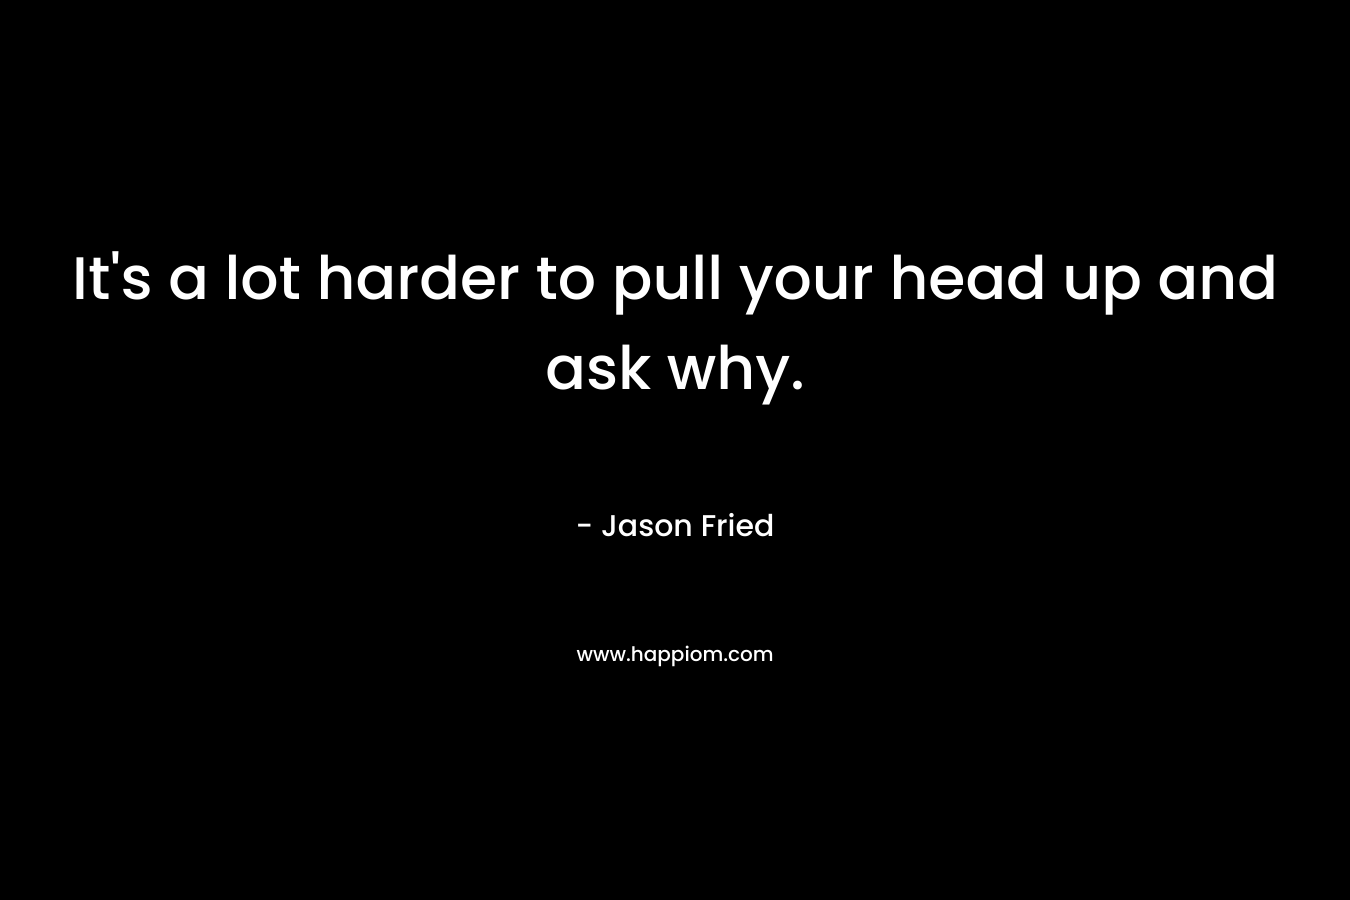 It’s a lot harder to pull your head up and ask why. – Jason Fried